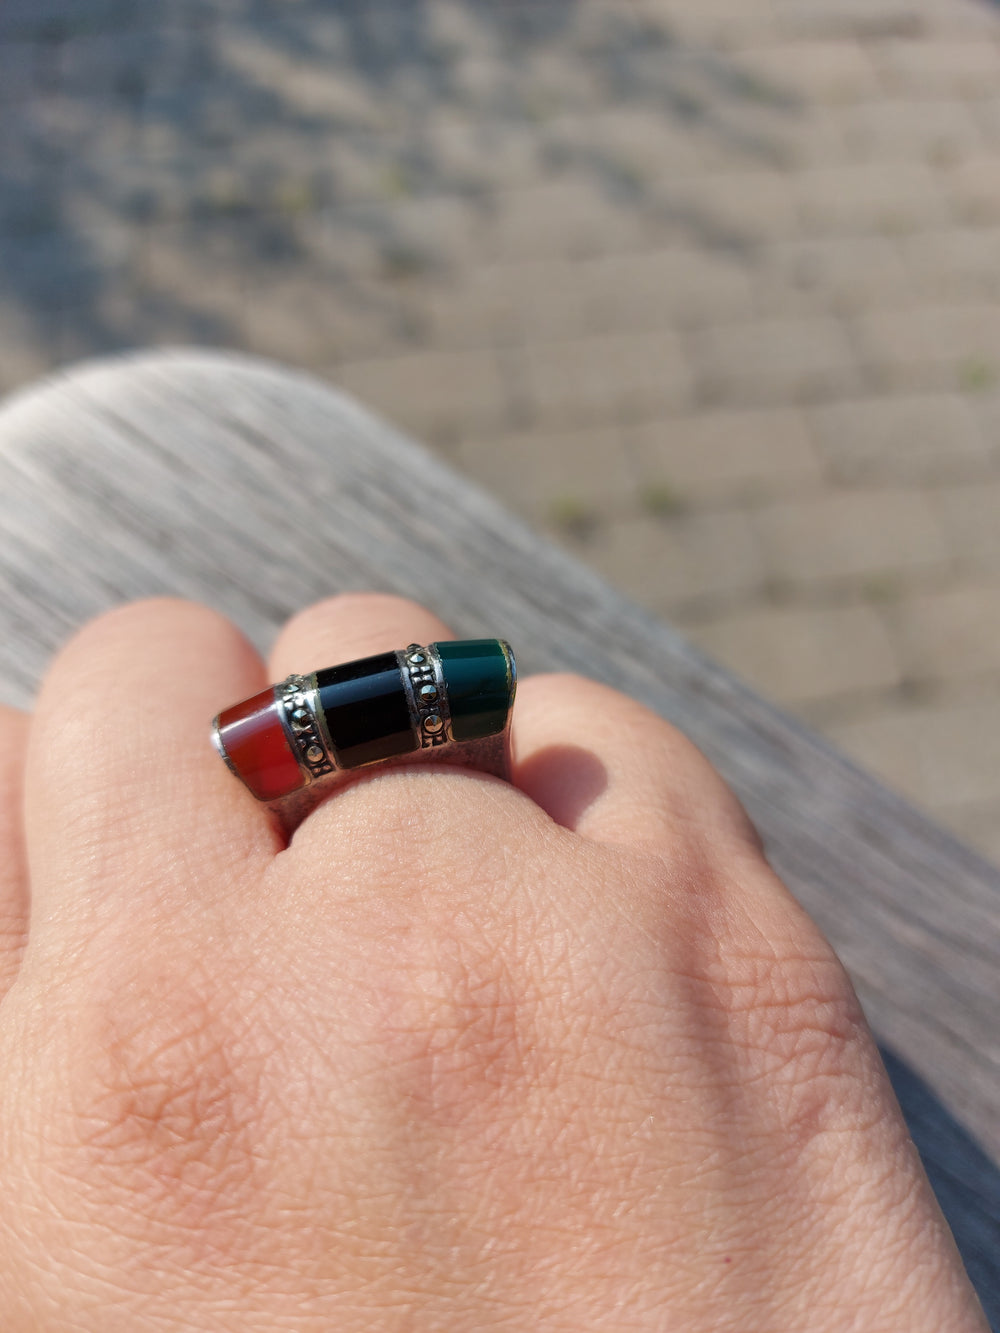 Onyx, Carnelian and Green Agate Ring / Silver Marcasite Ring / Silver Statement Ring